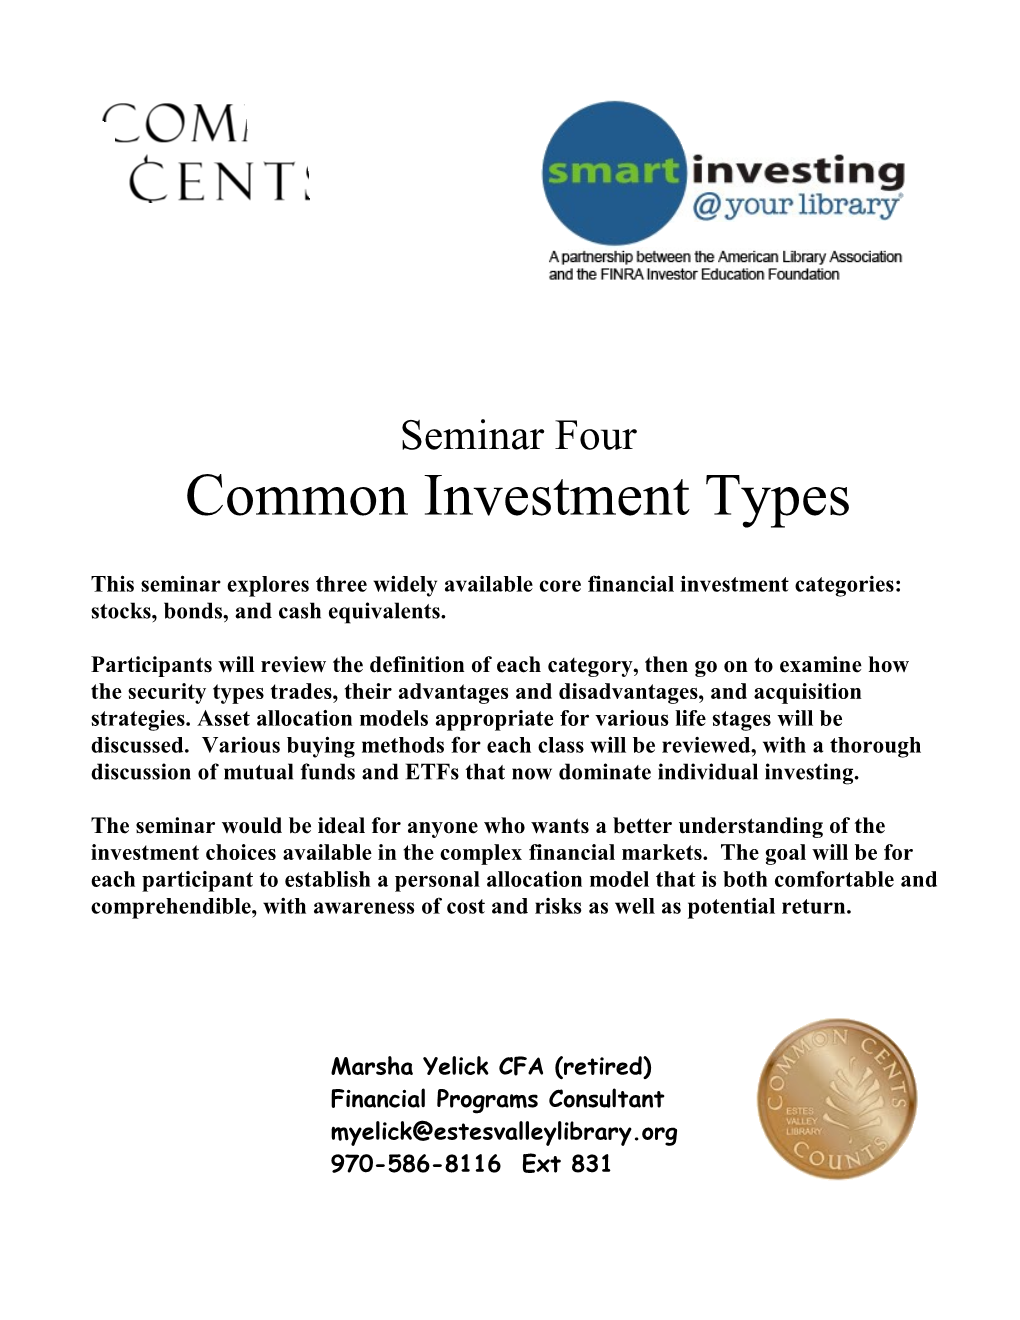 Common Investment Types